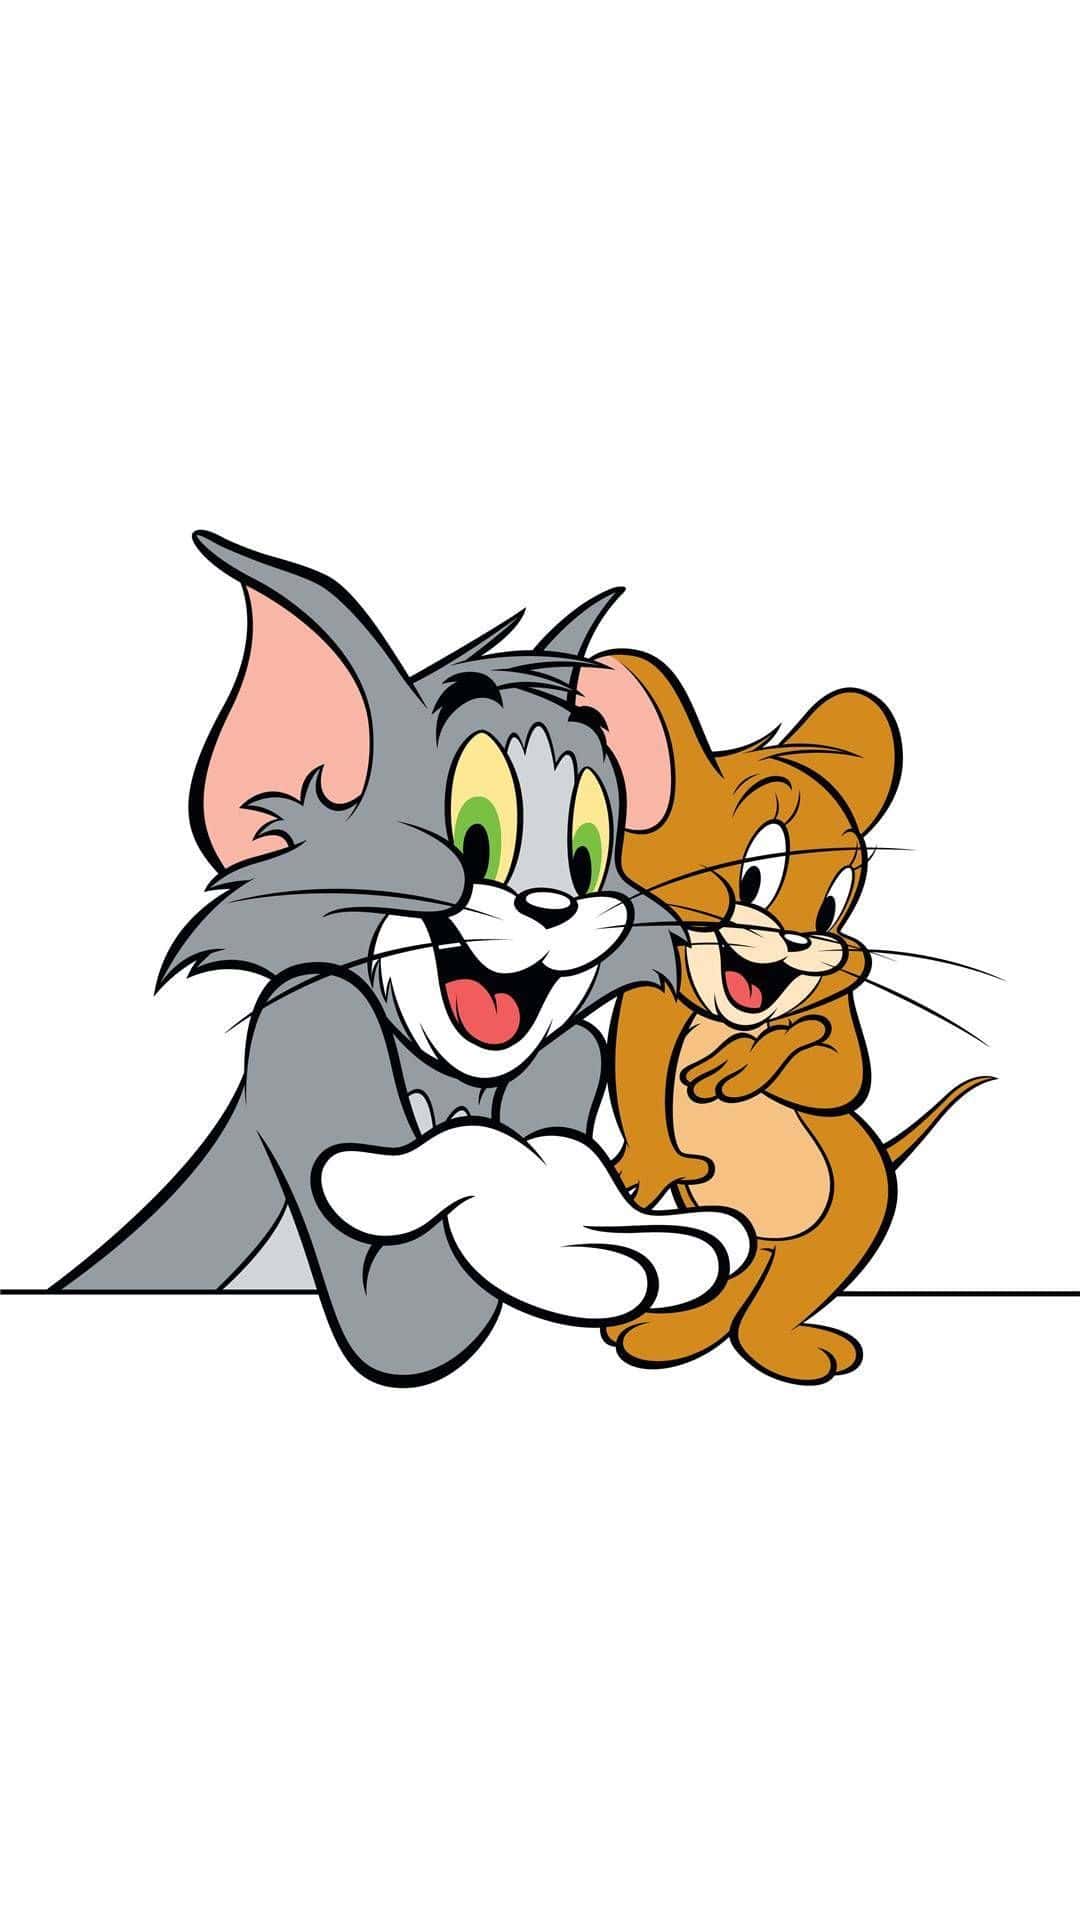 Tom Jerry Wallpaper - KoLPaPer - Awesome Free HD Wallpapers